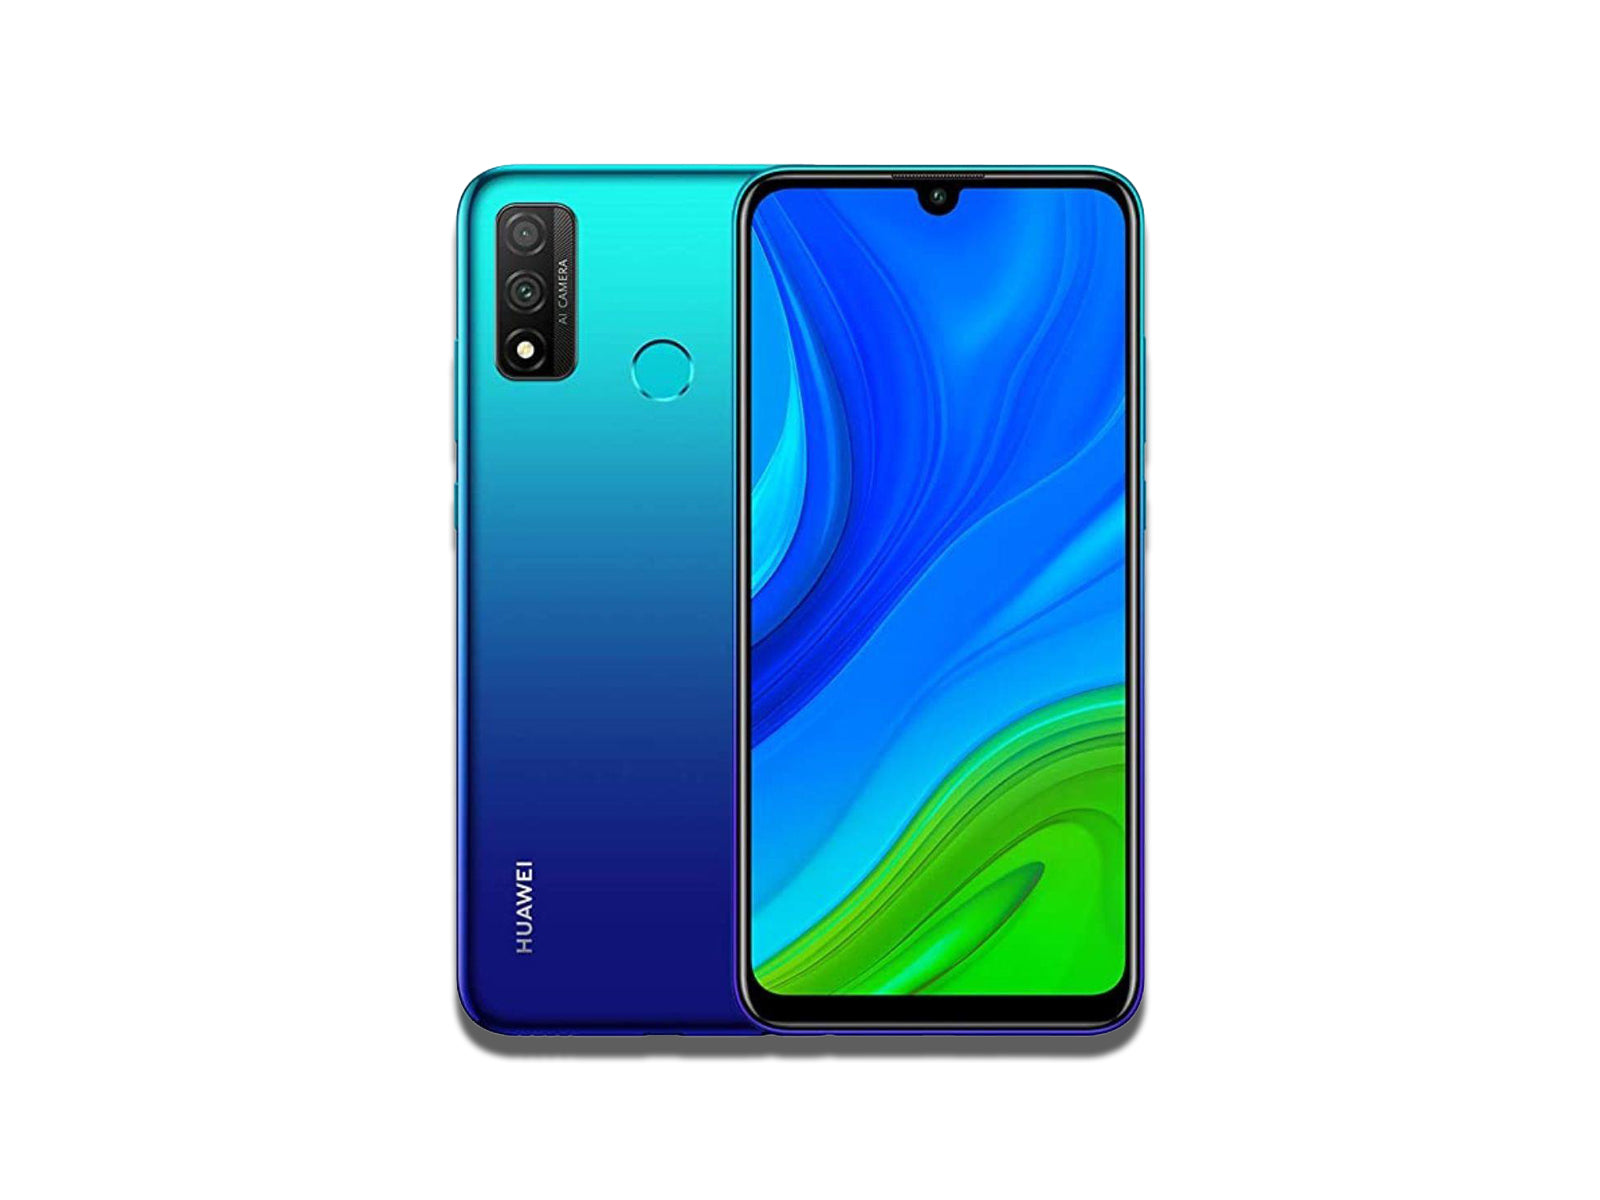 Image Showing Blue Colour Variant of The Huawei Nova 3 on The White Background